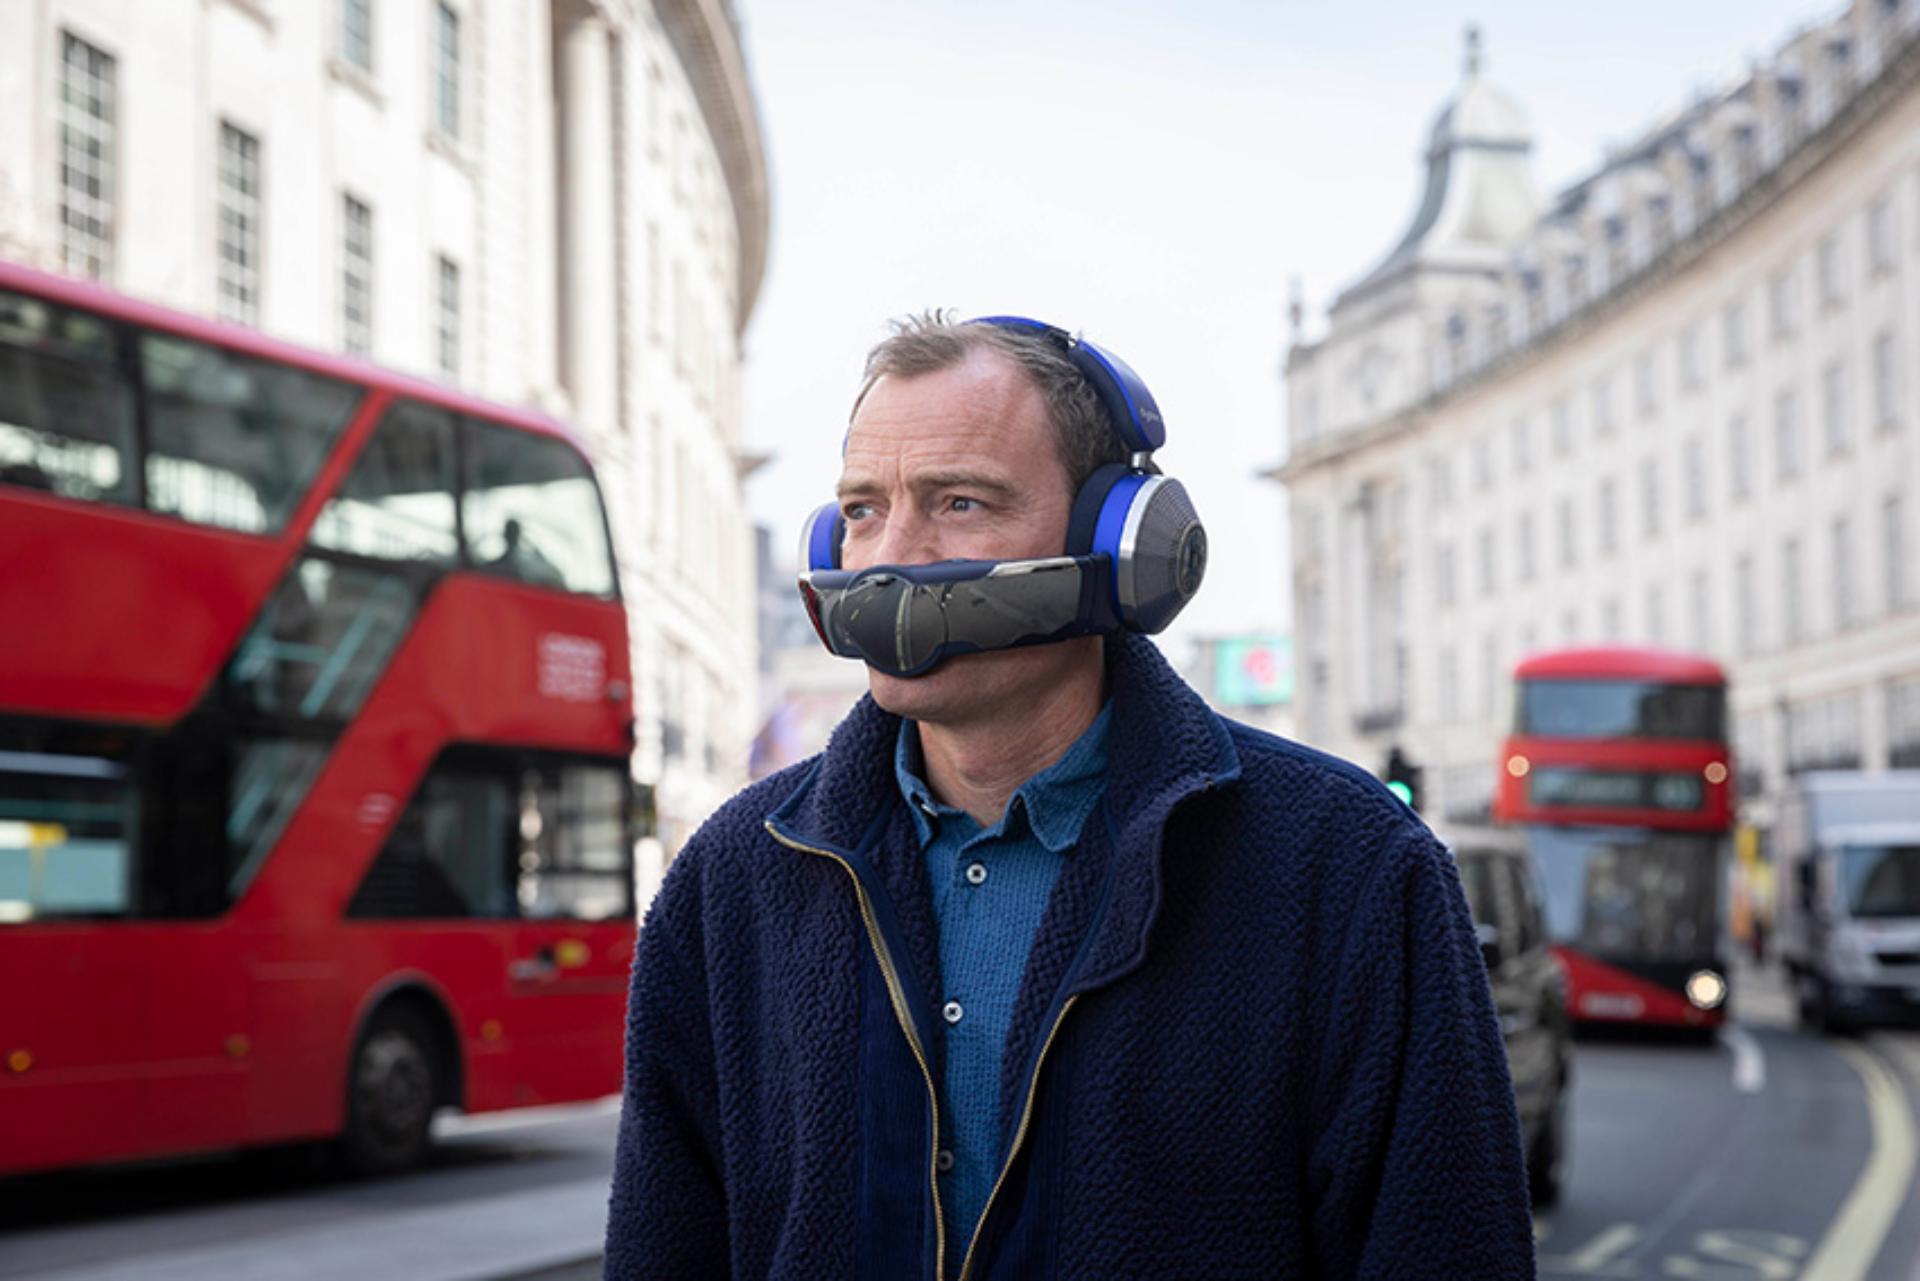 Dyson Zone, pricey headphones and mouth mask in one